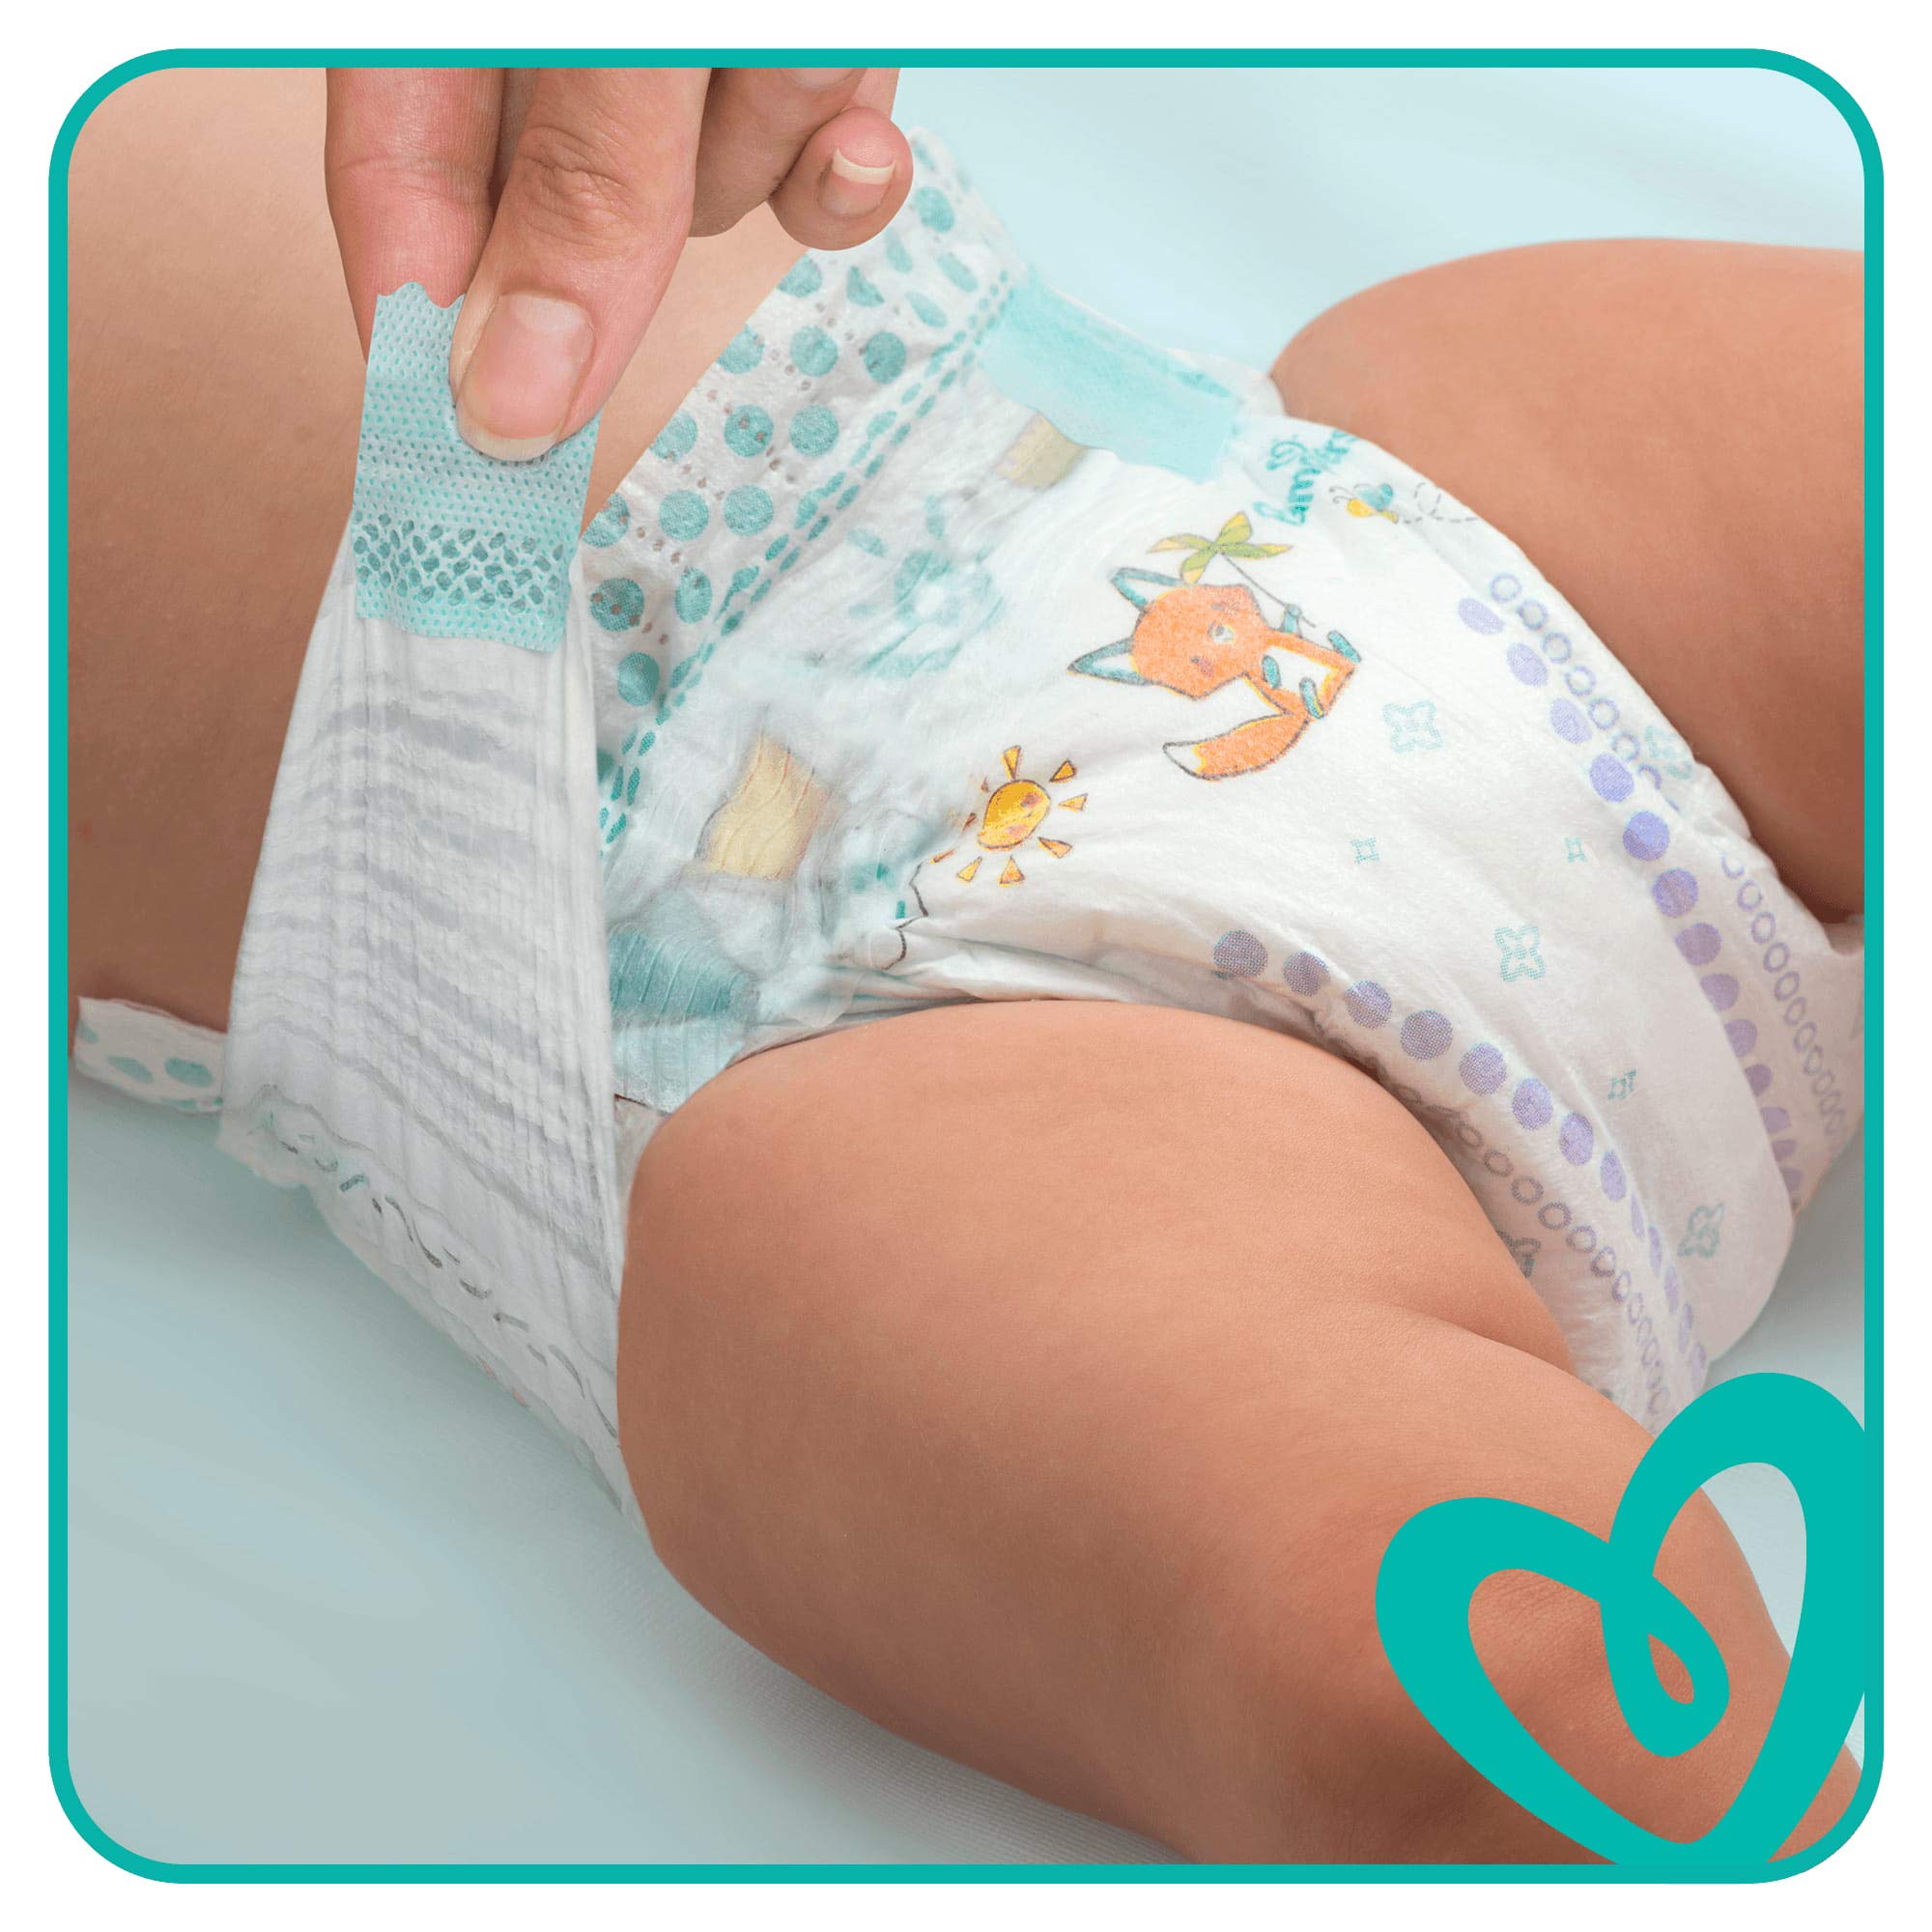 pieluchy pampers pants 5 premium care